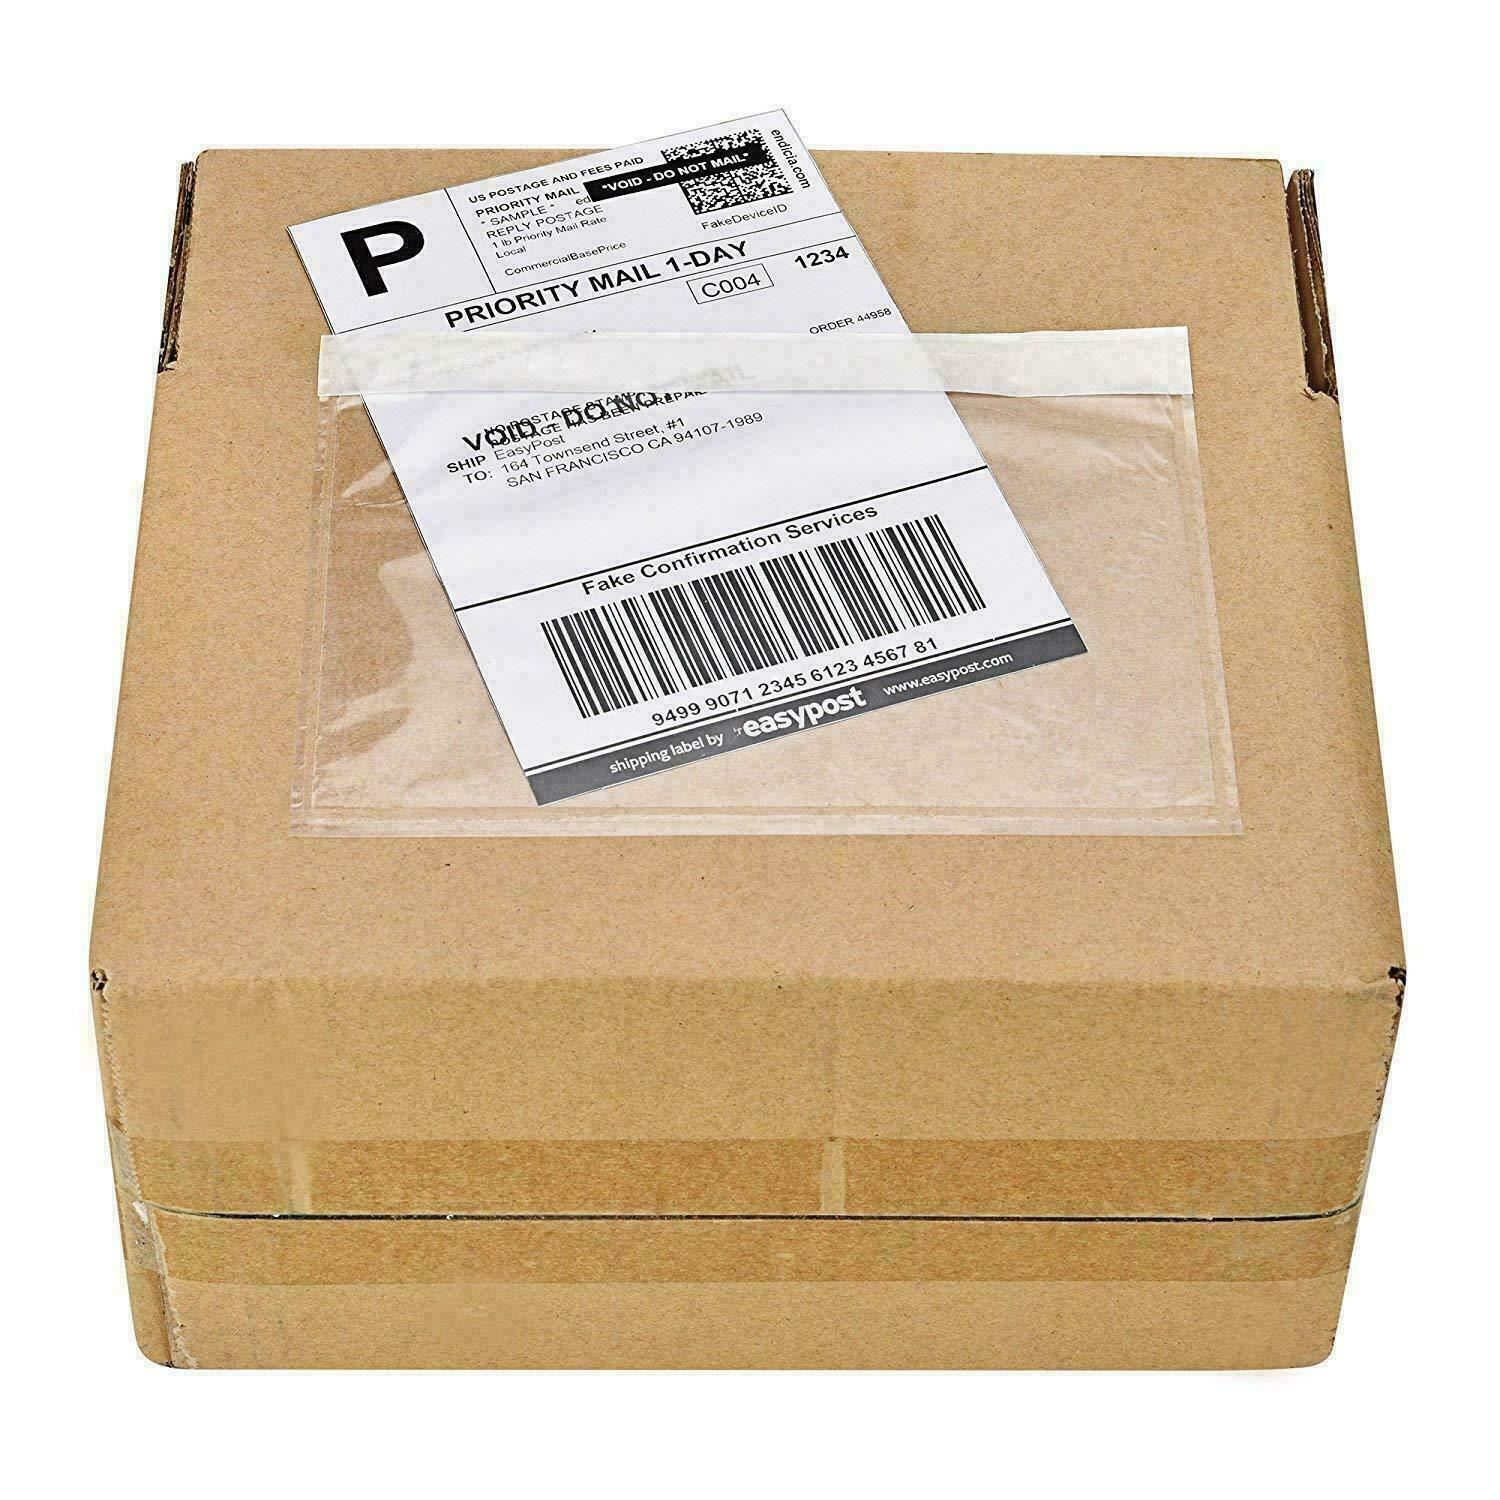 5.5\'\'x7.5\'\' Clear Packing List Envelope Adhesive Shipping Document Label Pouches